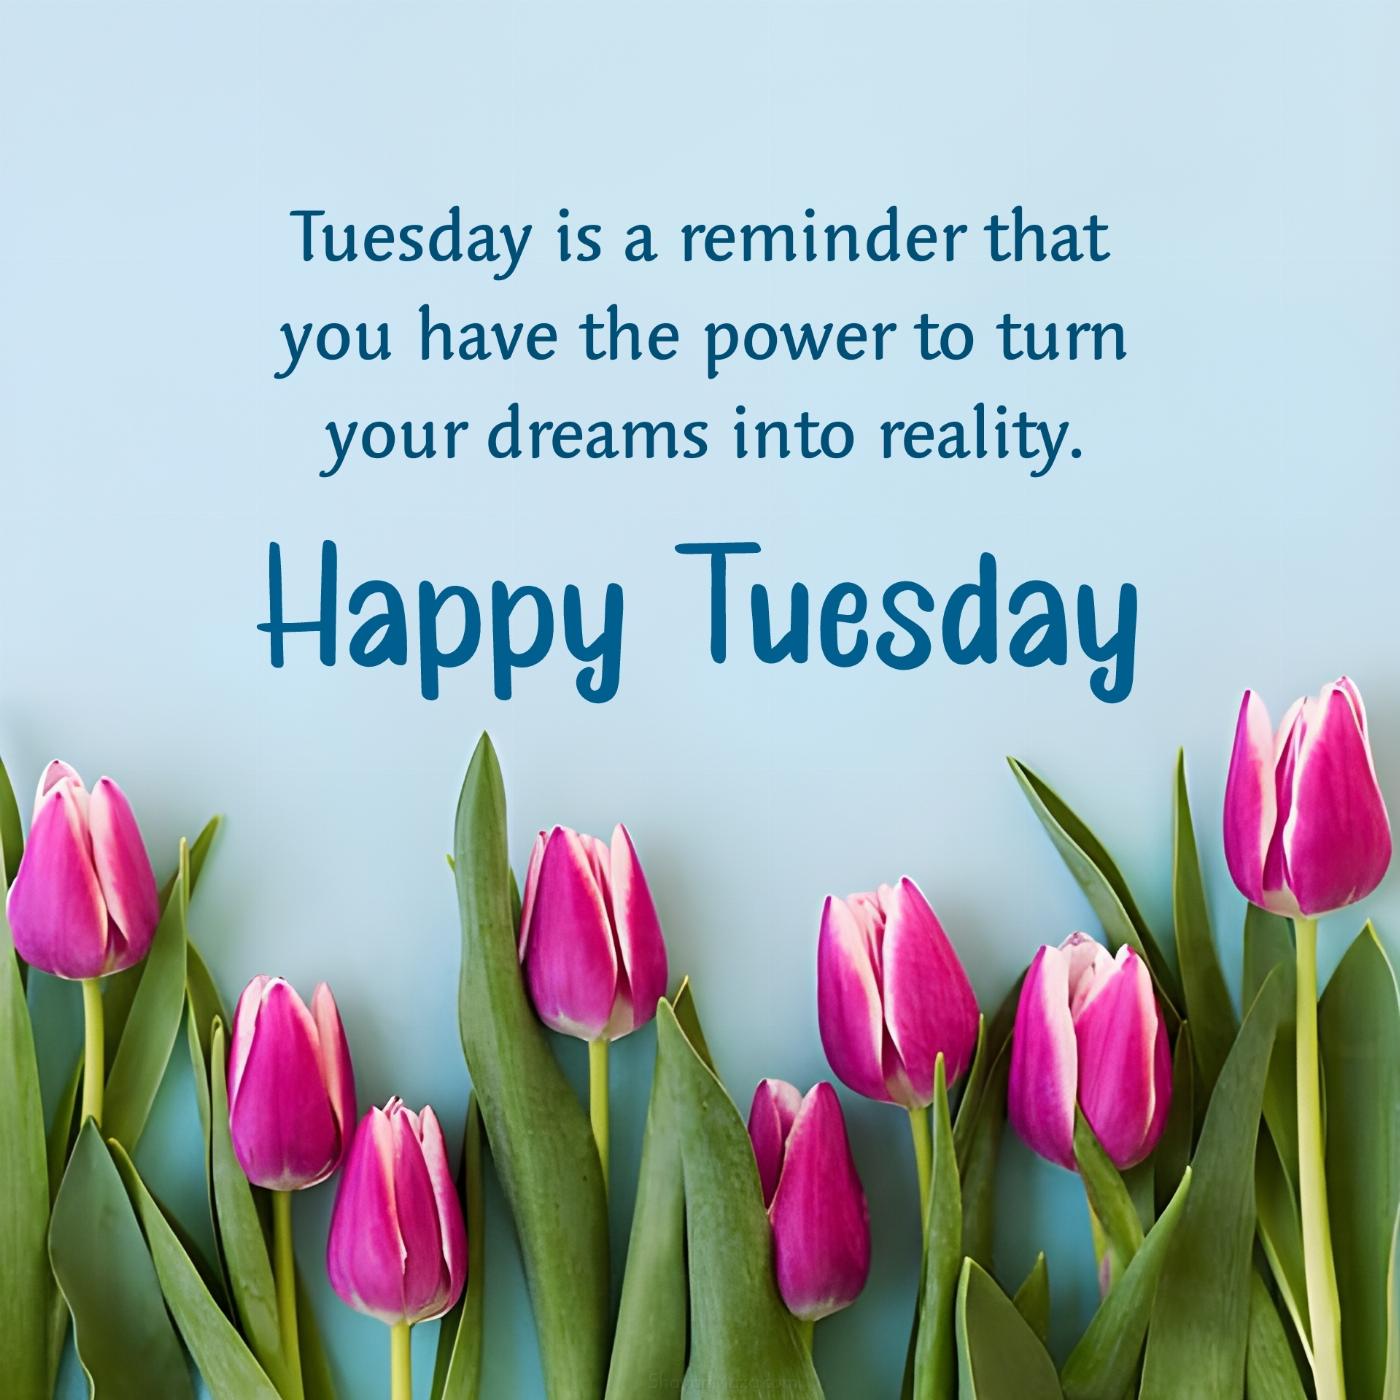 Tuesday is a reminder that you have the power to turn your dreams